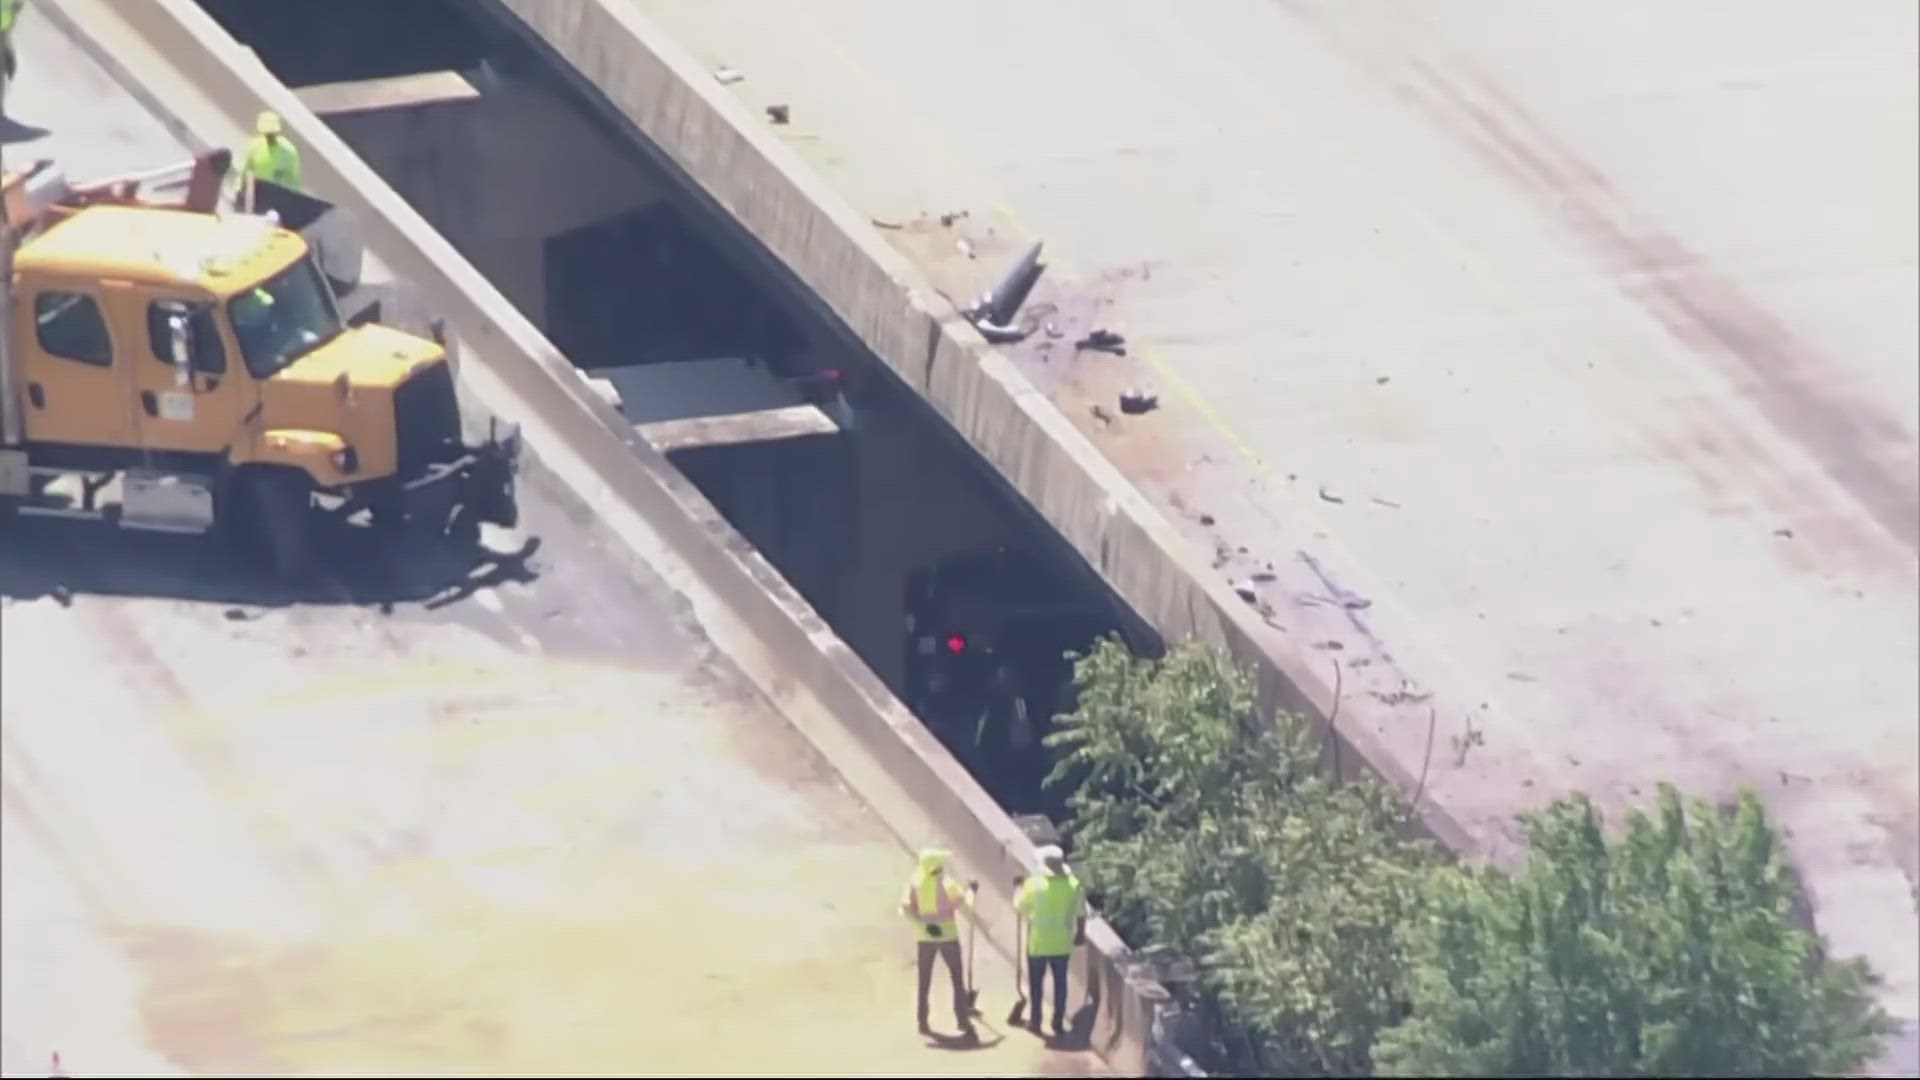 Investigators say a tractor trailer went over a bridge on I-270 and into the creek below.